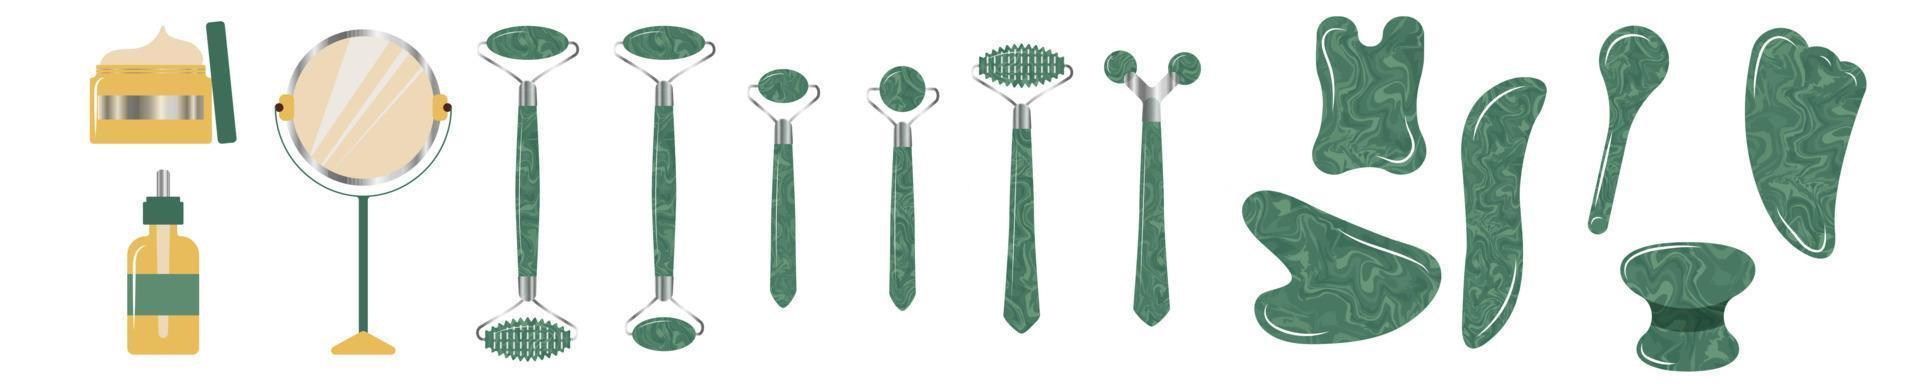 Set of green jade roller and guasha tool for facial massage and skincare. Exercise for your face for wellness with gemstones. vector